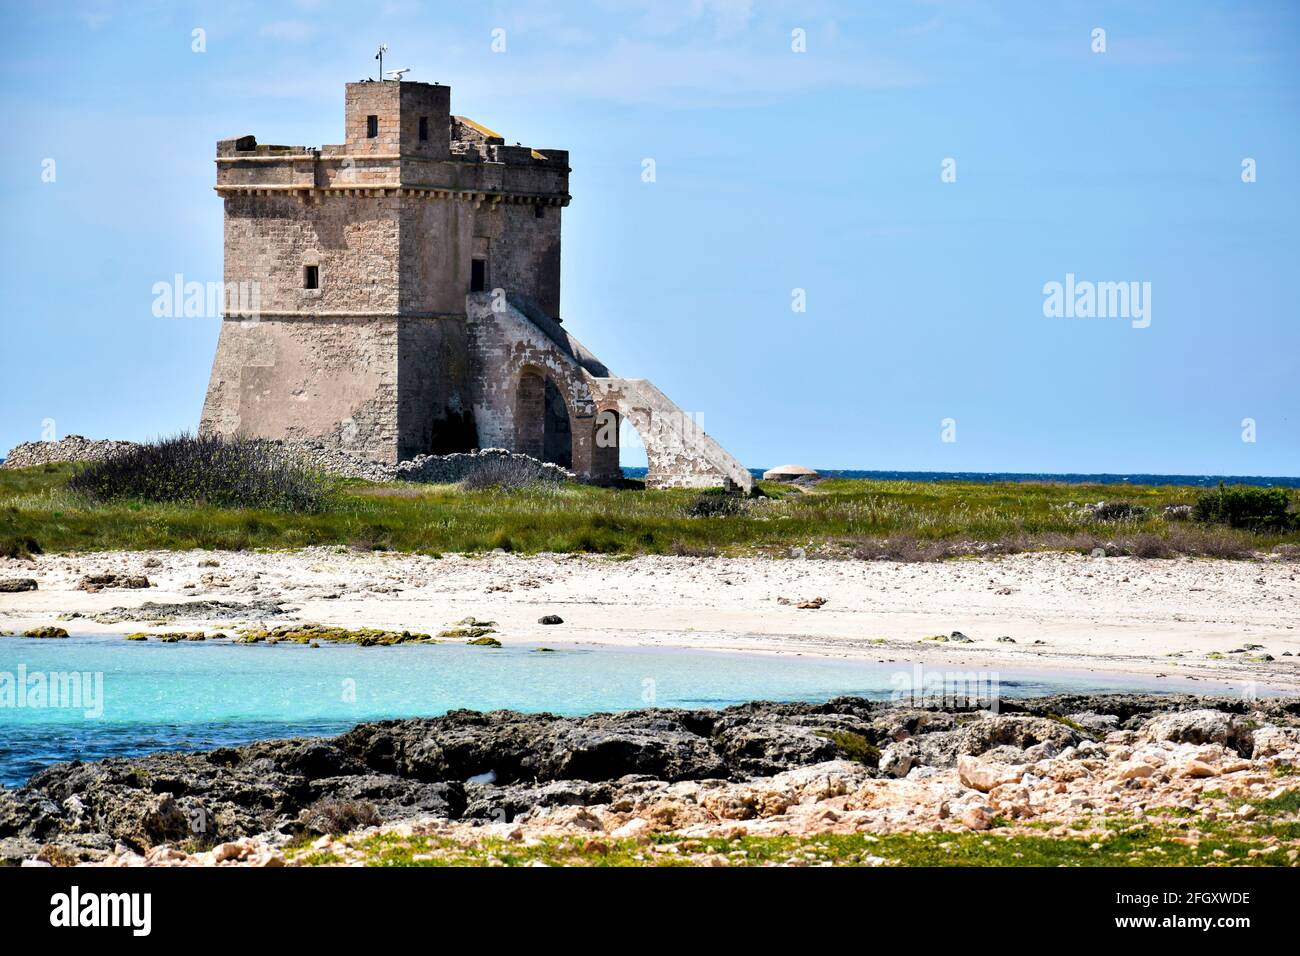 Old tower and crystalline water Stock Photo